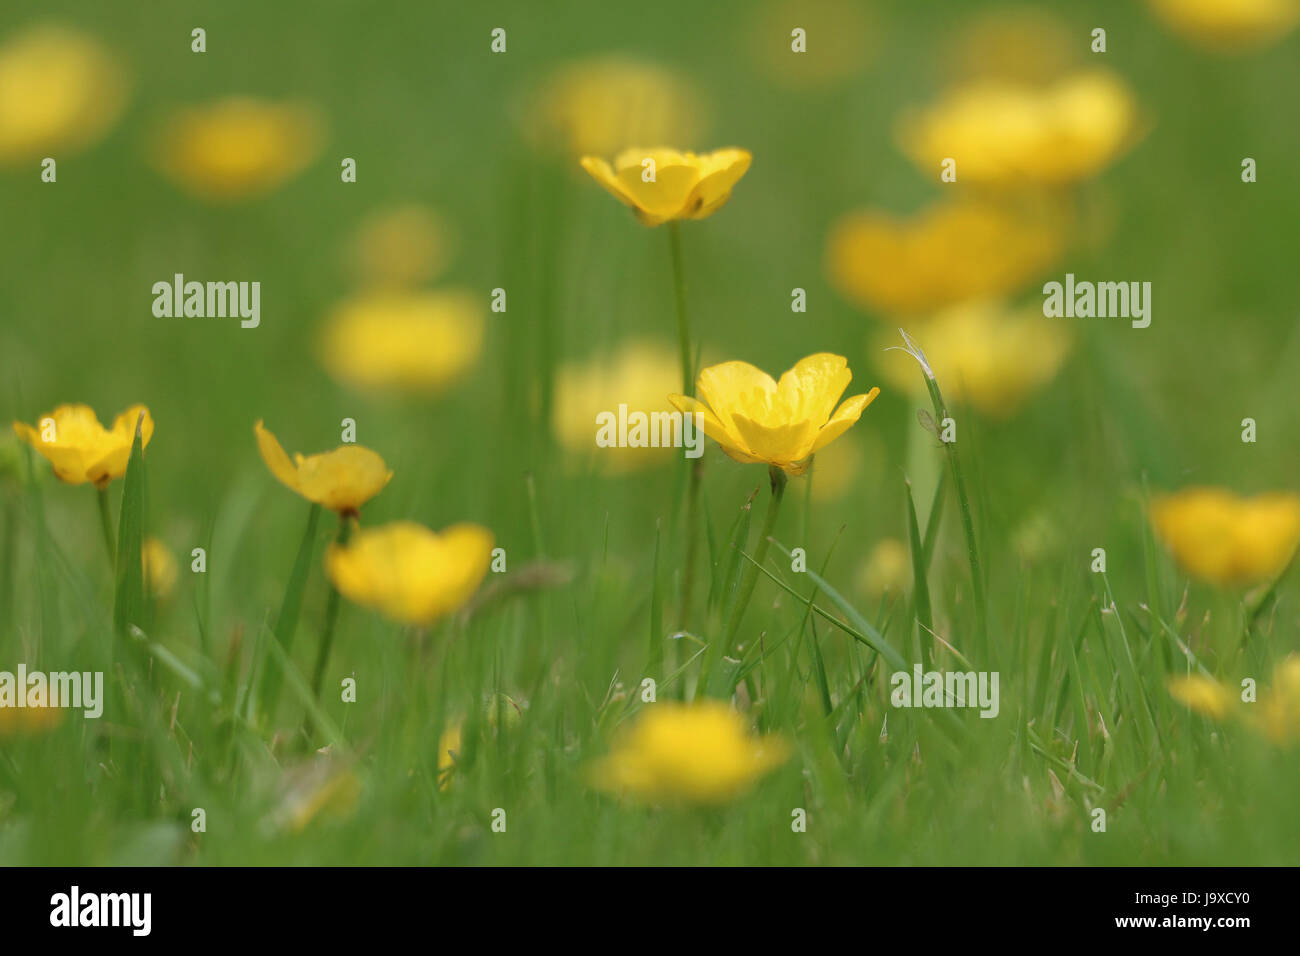 Yellow Creeping Buttercup Flowers, Ranunculus repens, blooming in the summer sun on a natural green grass background. Stock Photo